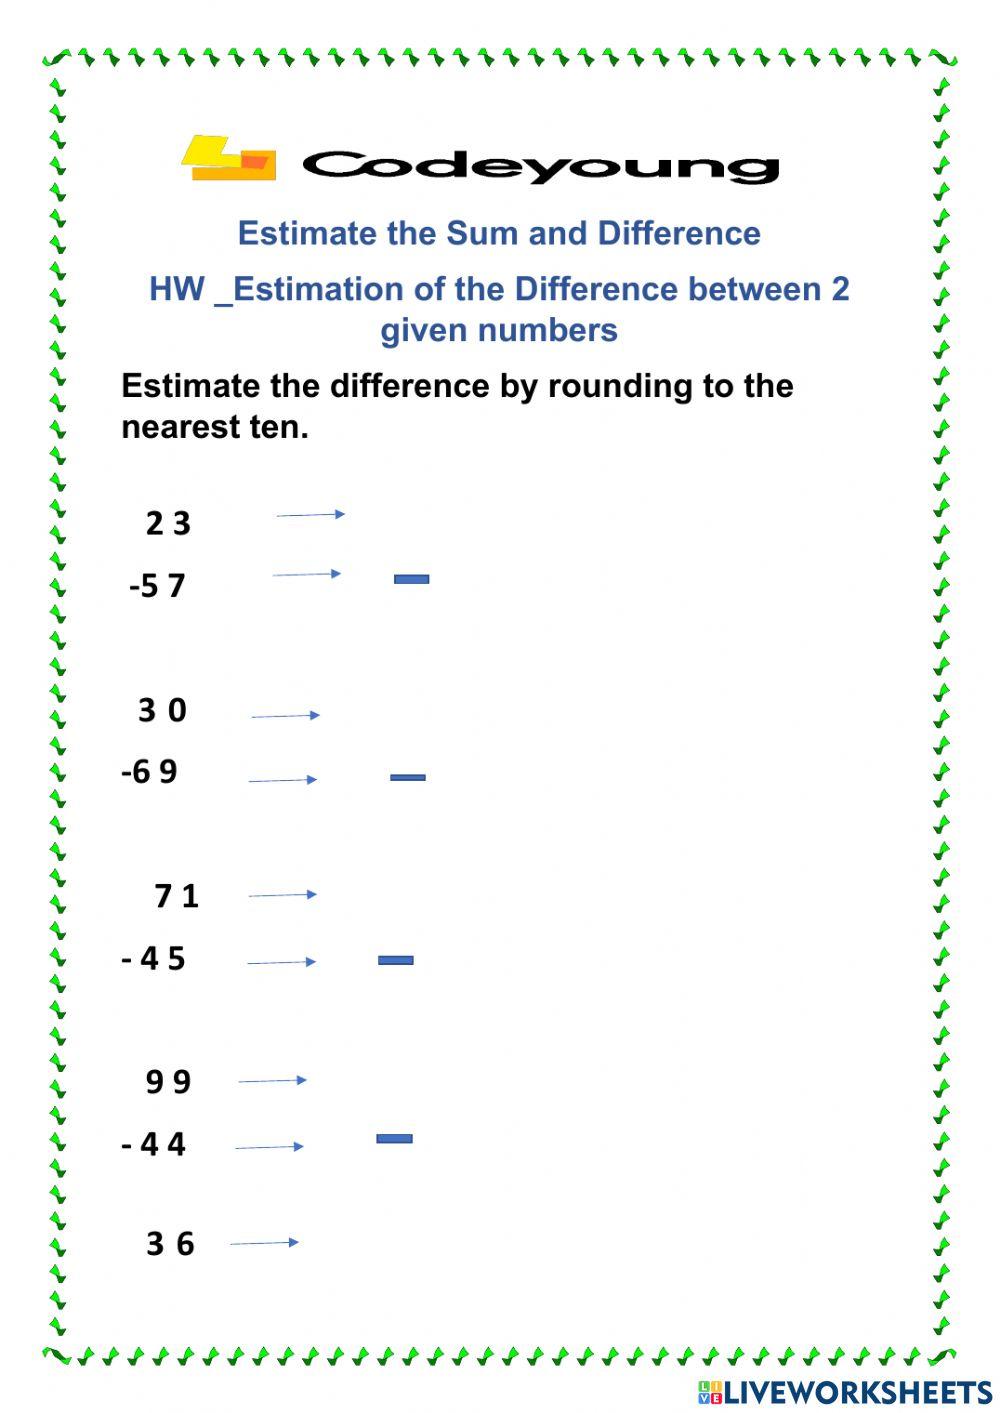 Estimation of the Difference between 2 given number